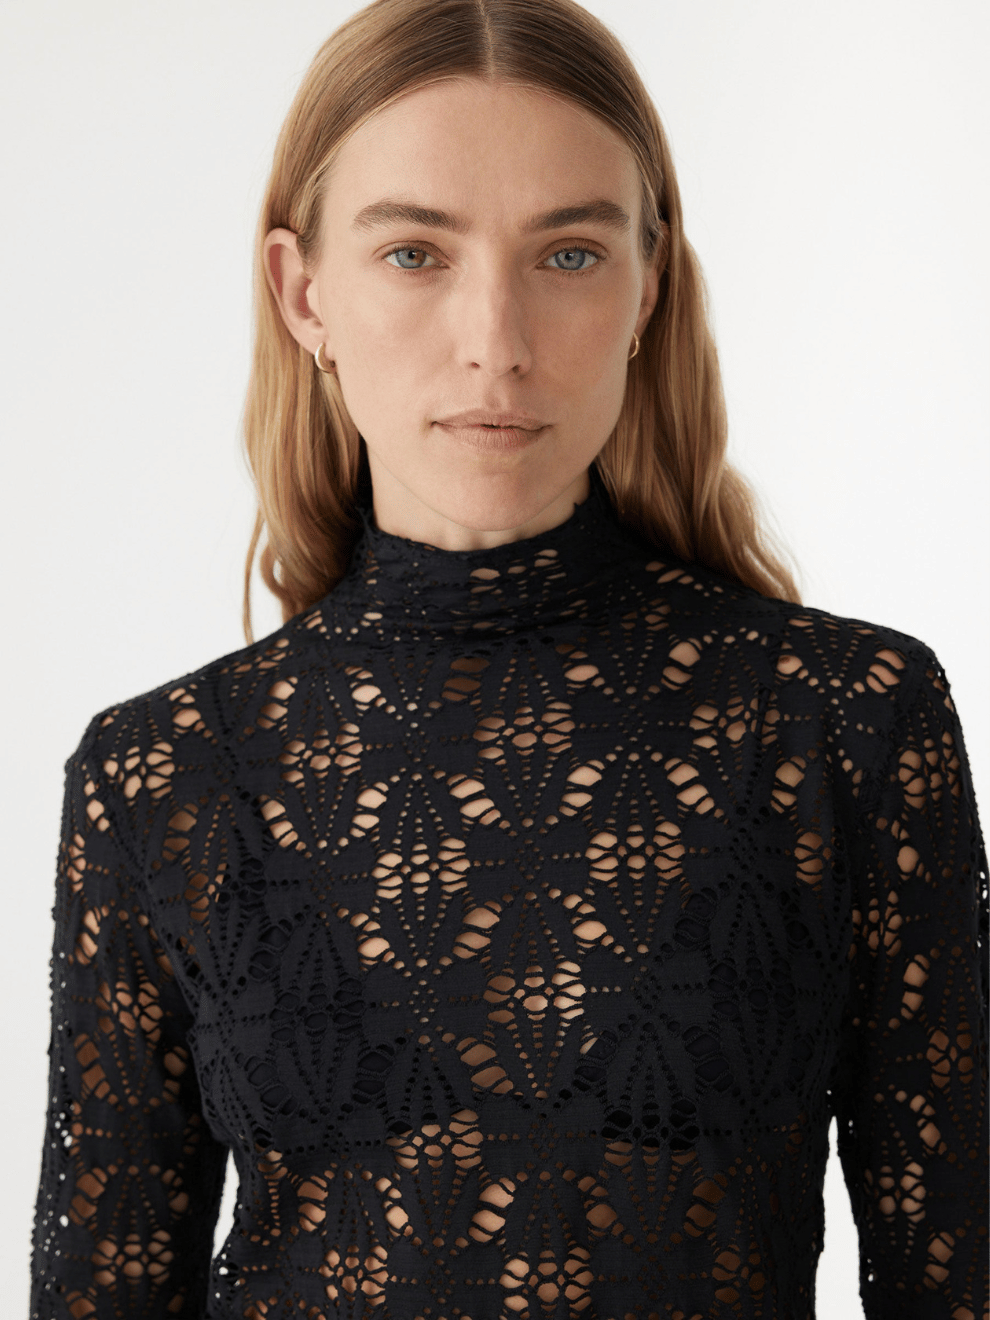 Long Sleeve Lace Top in Black